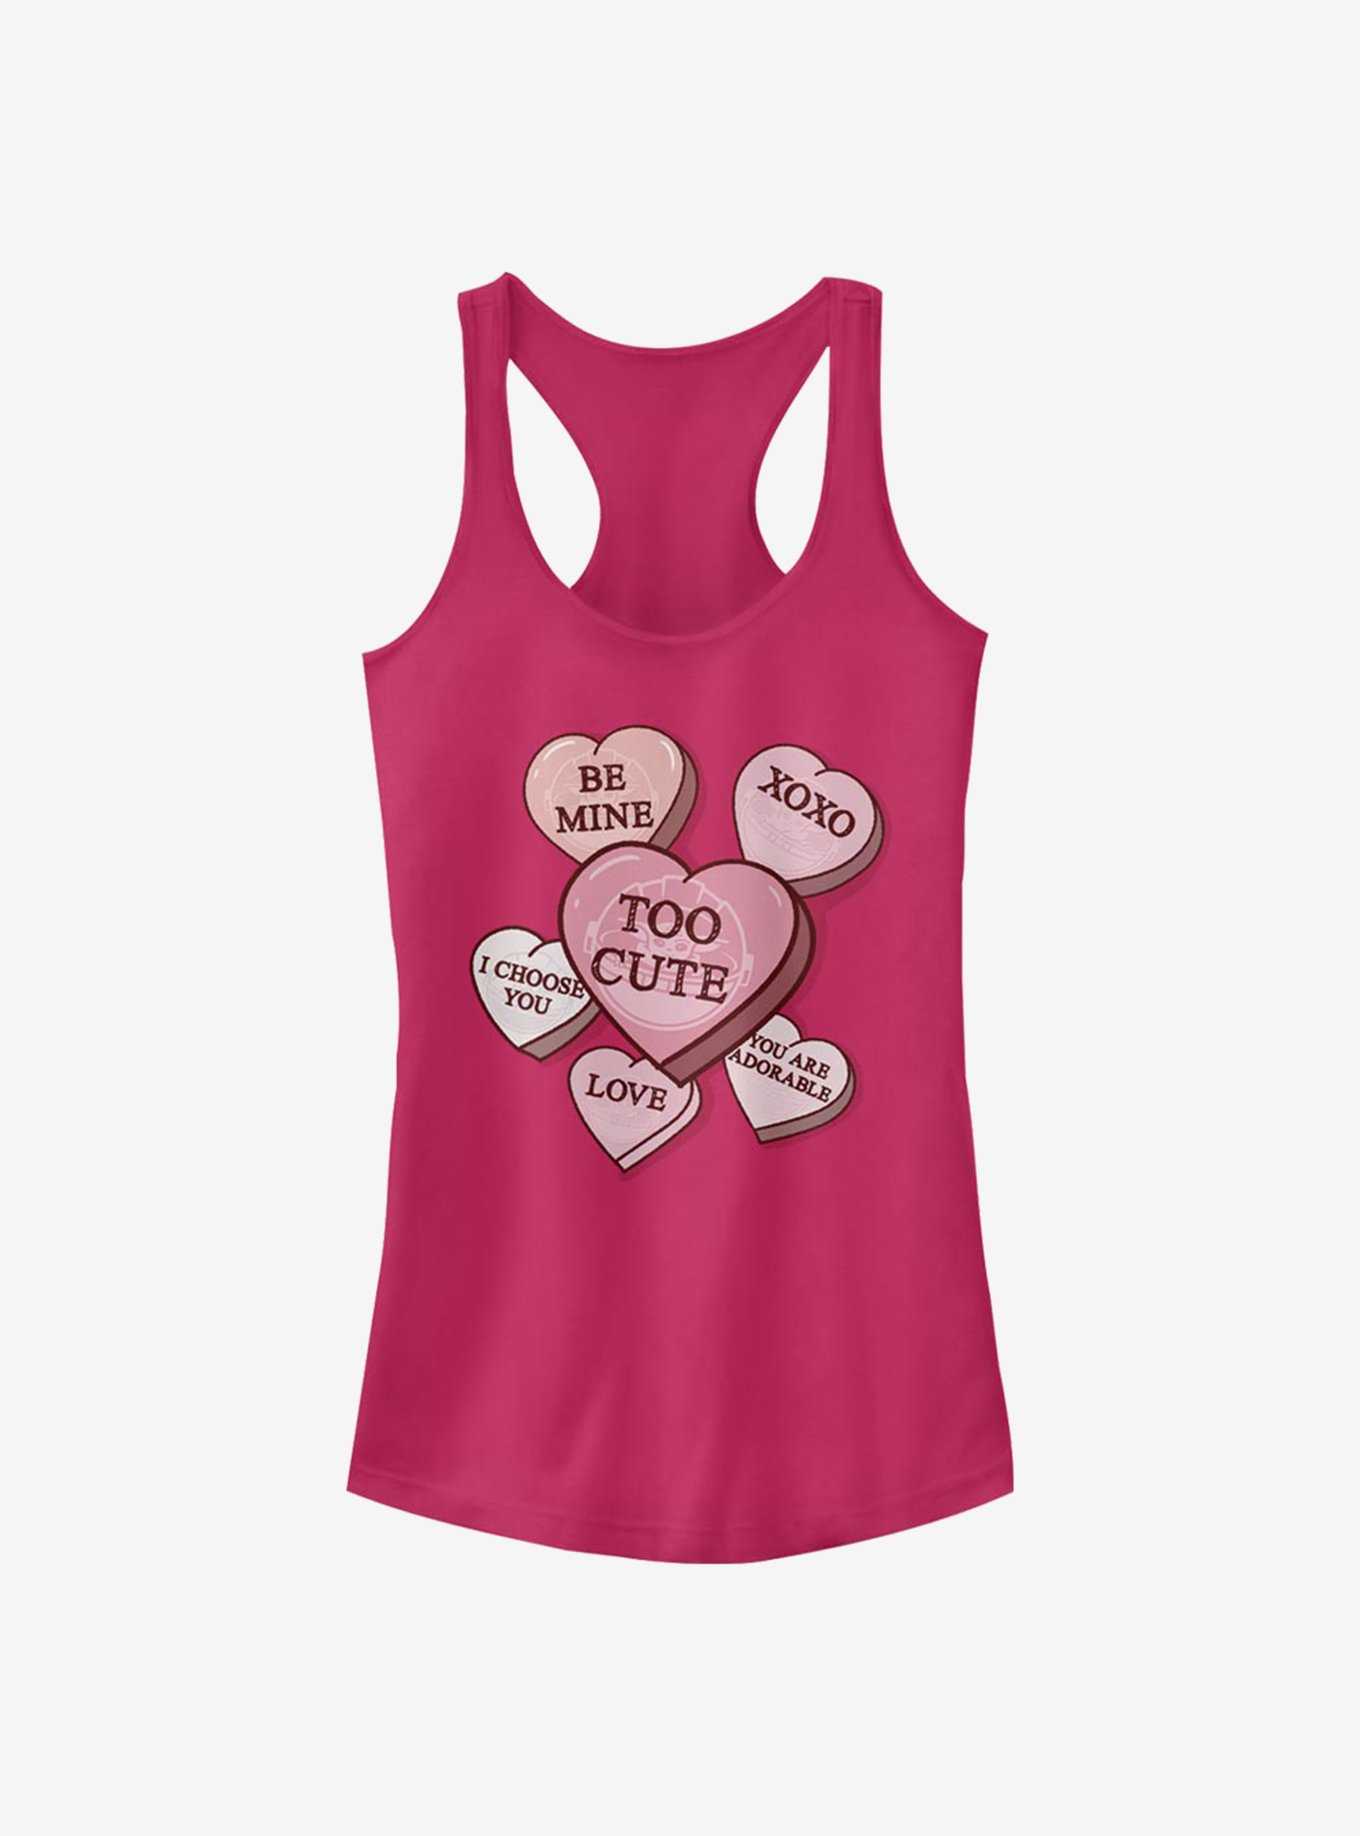 Star Wars The Mandalorian The Child Candy Hearts Girls Tank, , hi-res